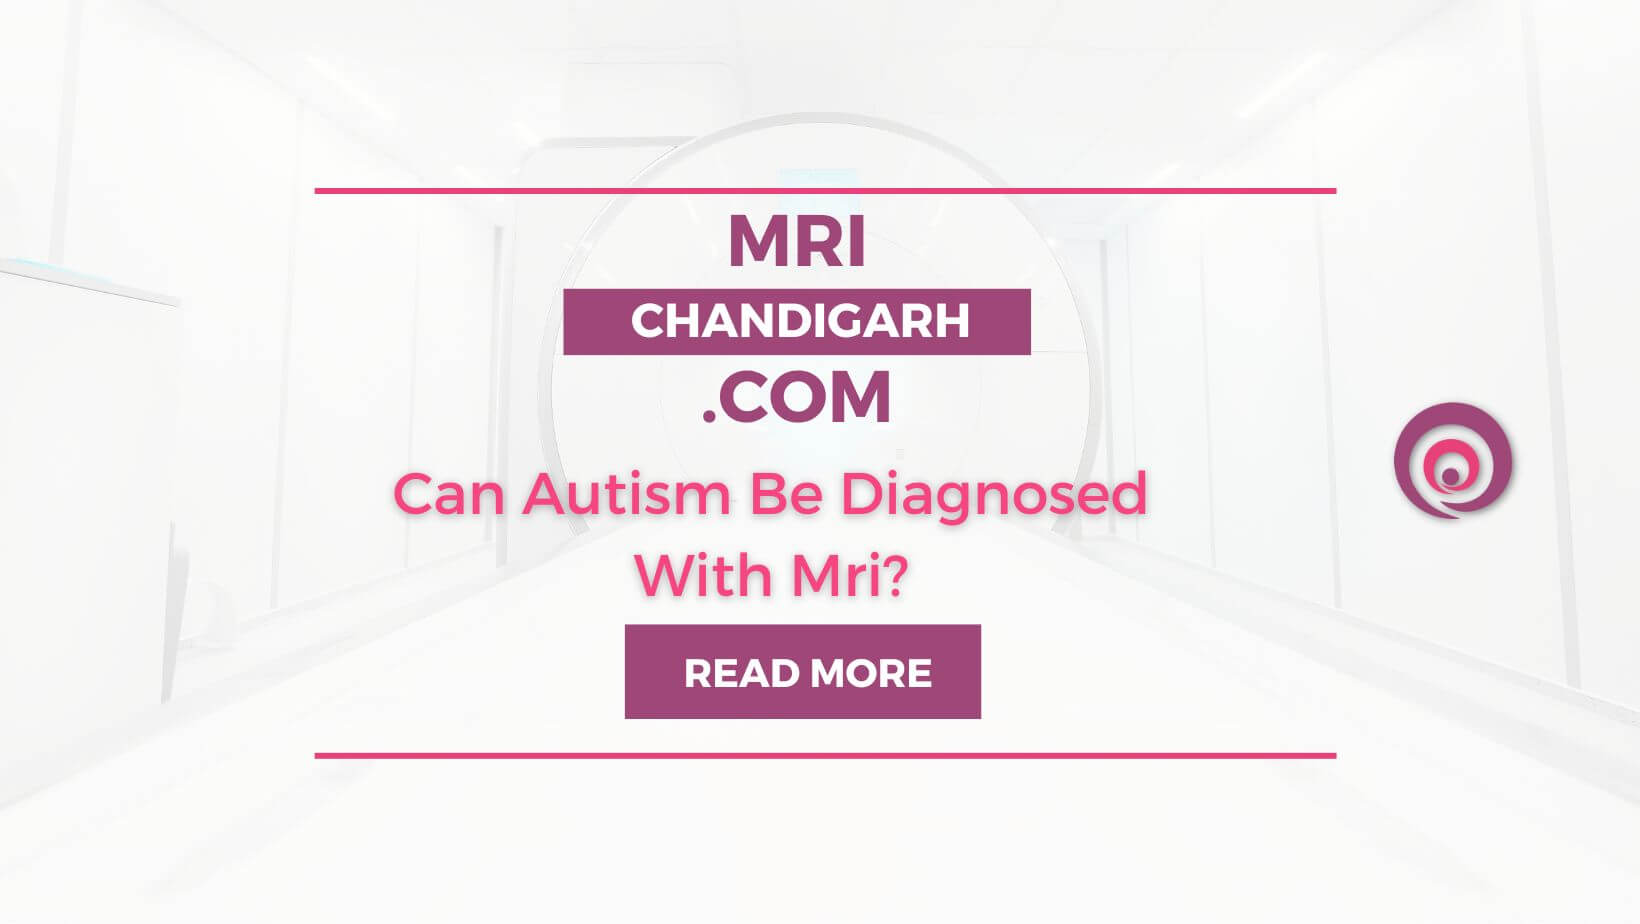 Can Autism Be Diagnosed With Mri?